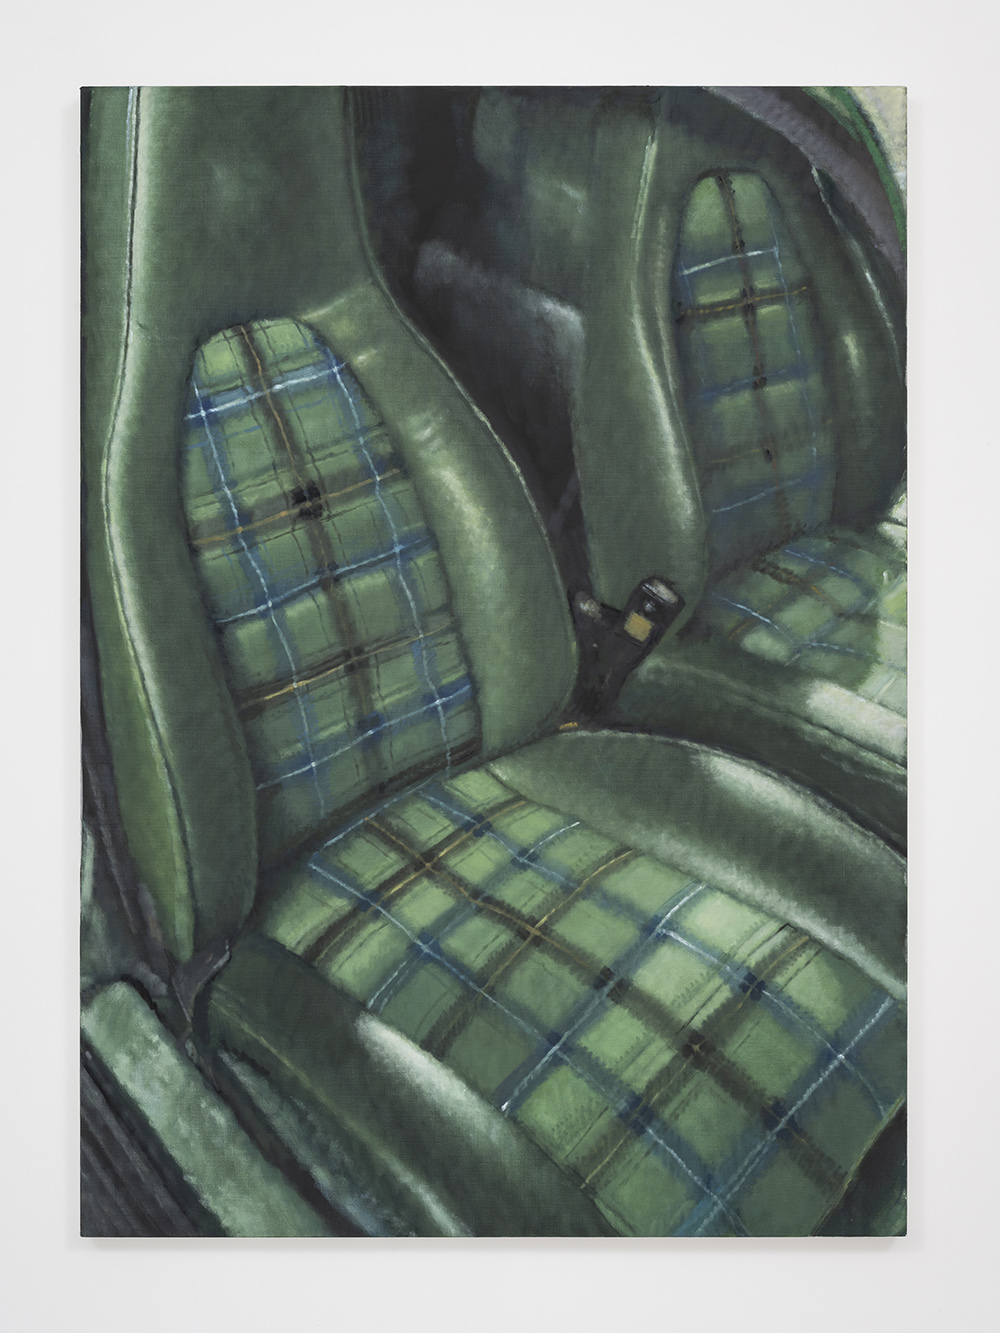 Painting of green leather car seats with plaid fabric pattern